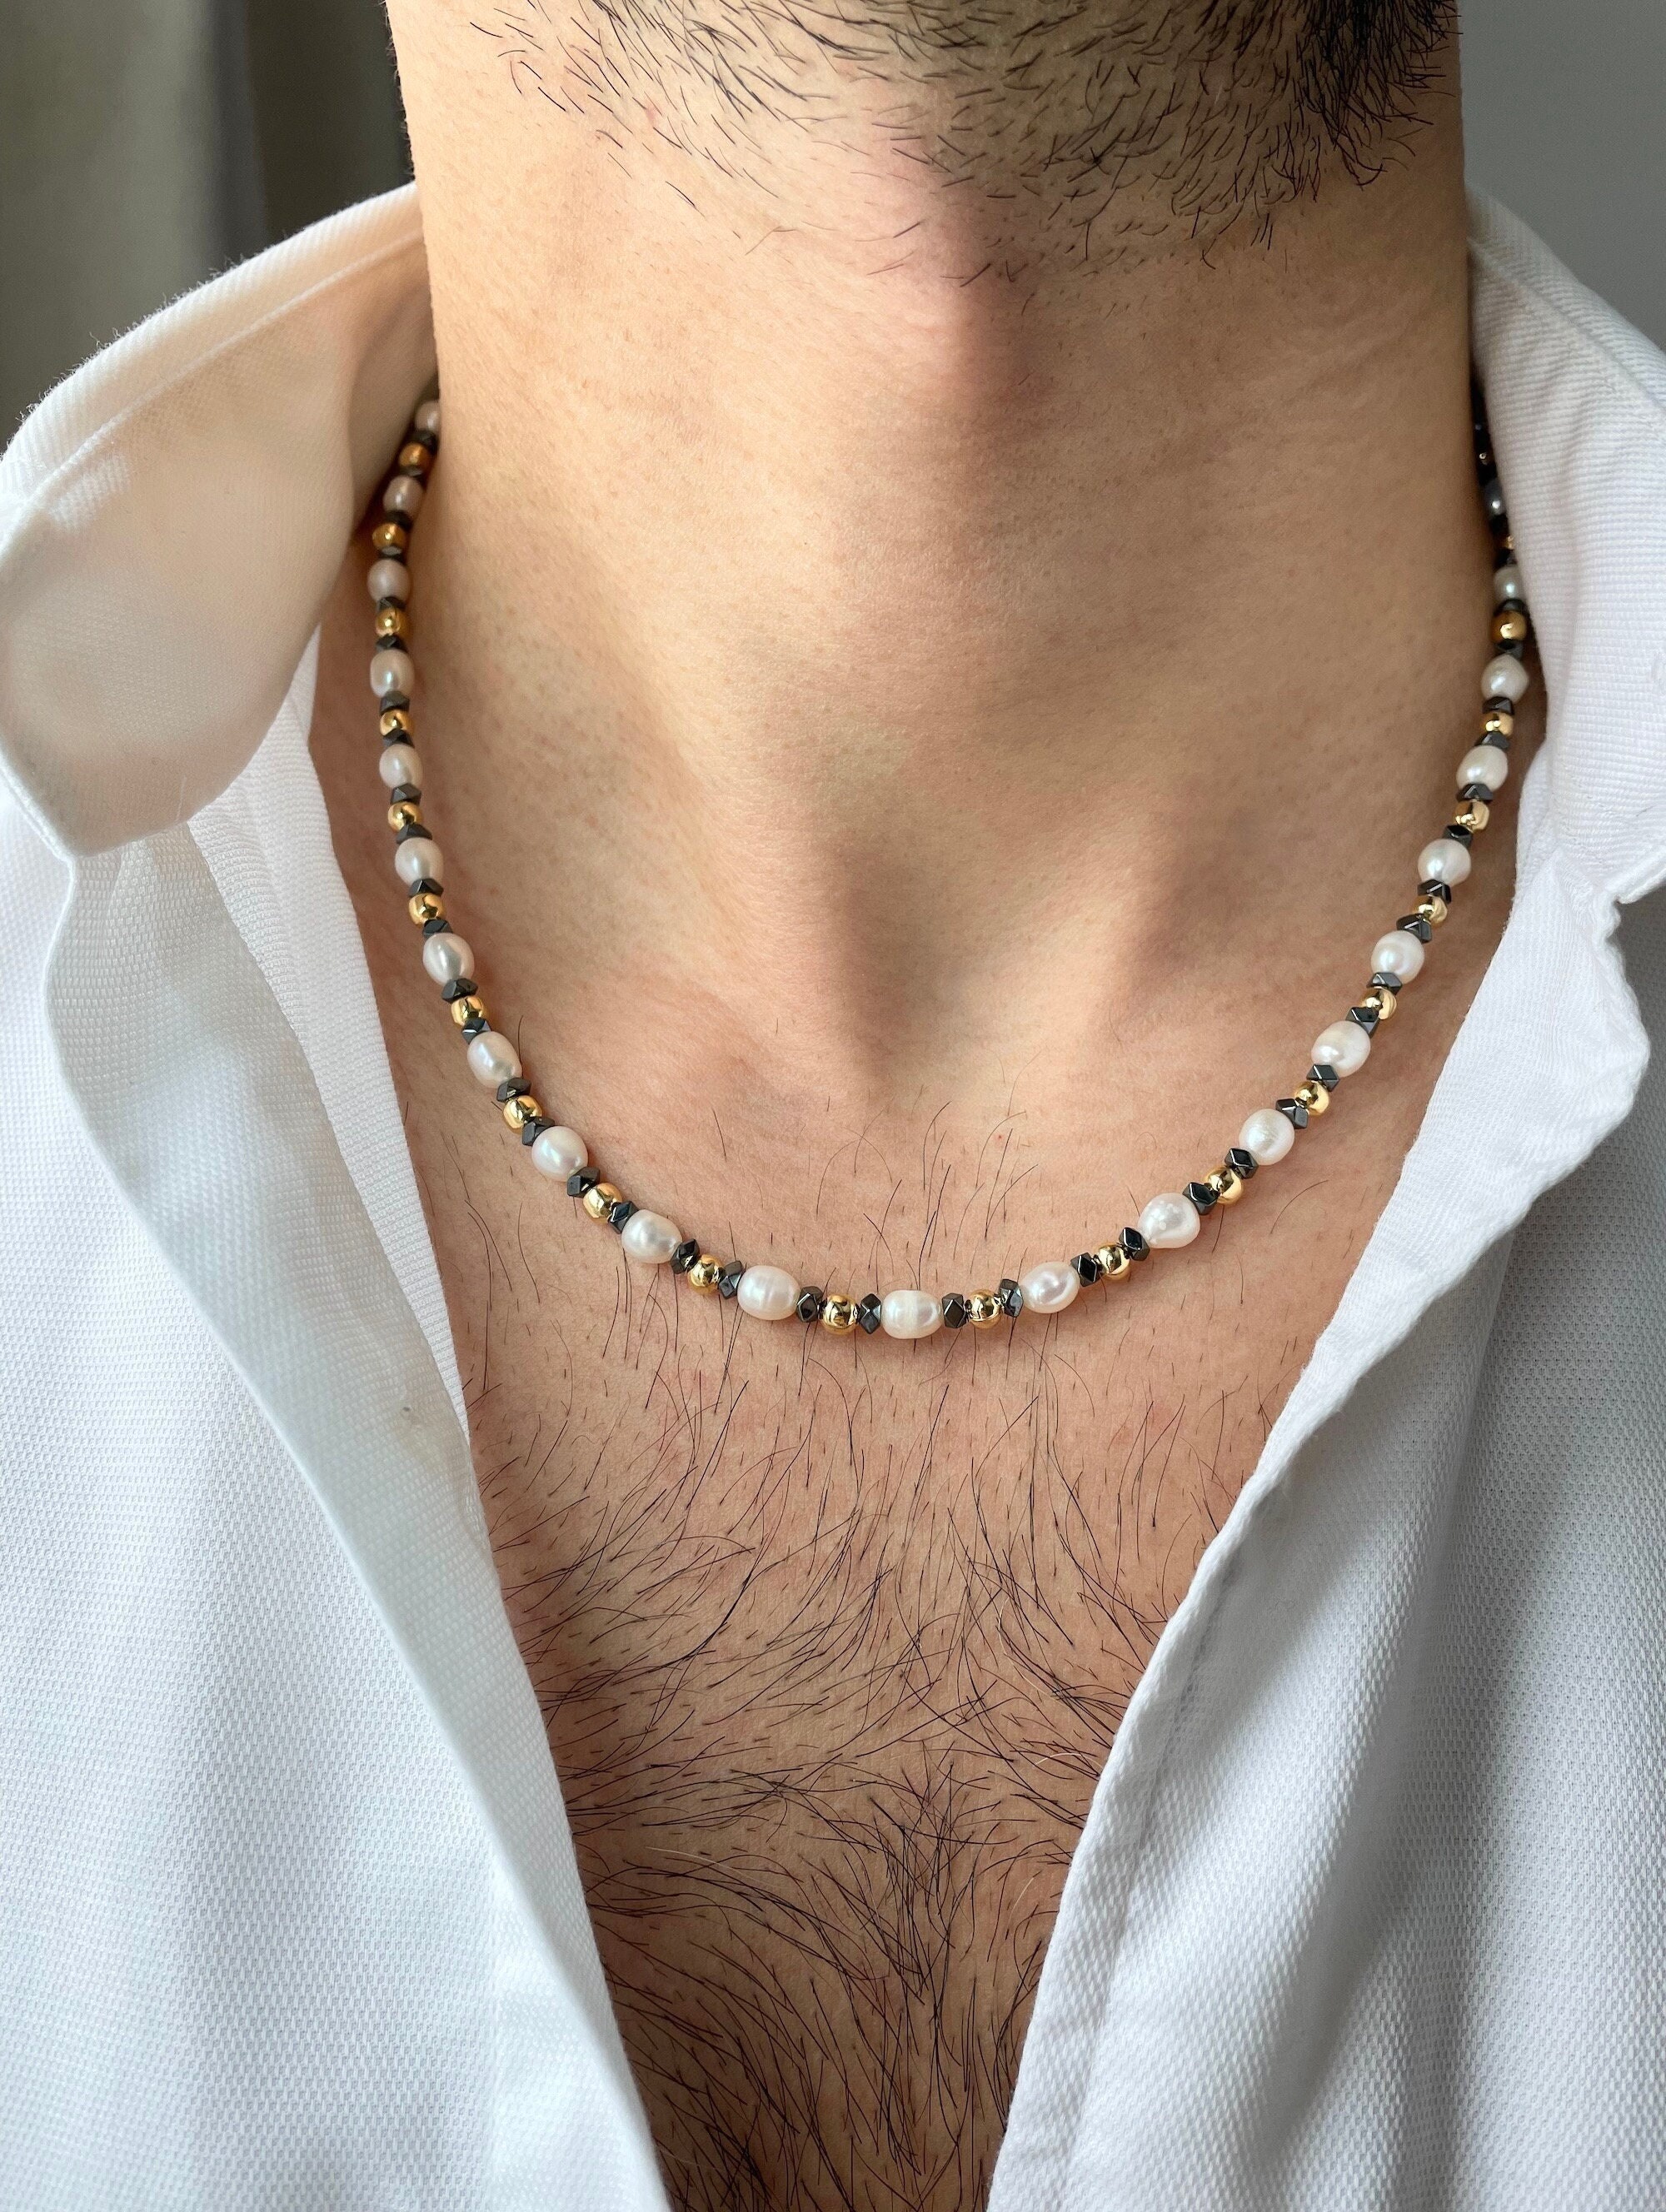 Real Pearls for Real Men! Single Pearl Choker on Chain with Tiger Eye –  Bourdage Pearls